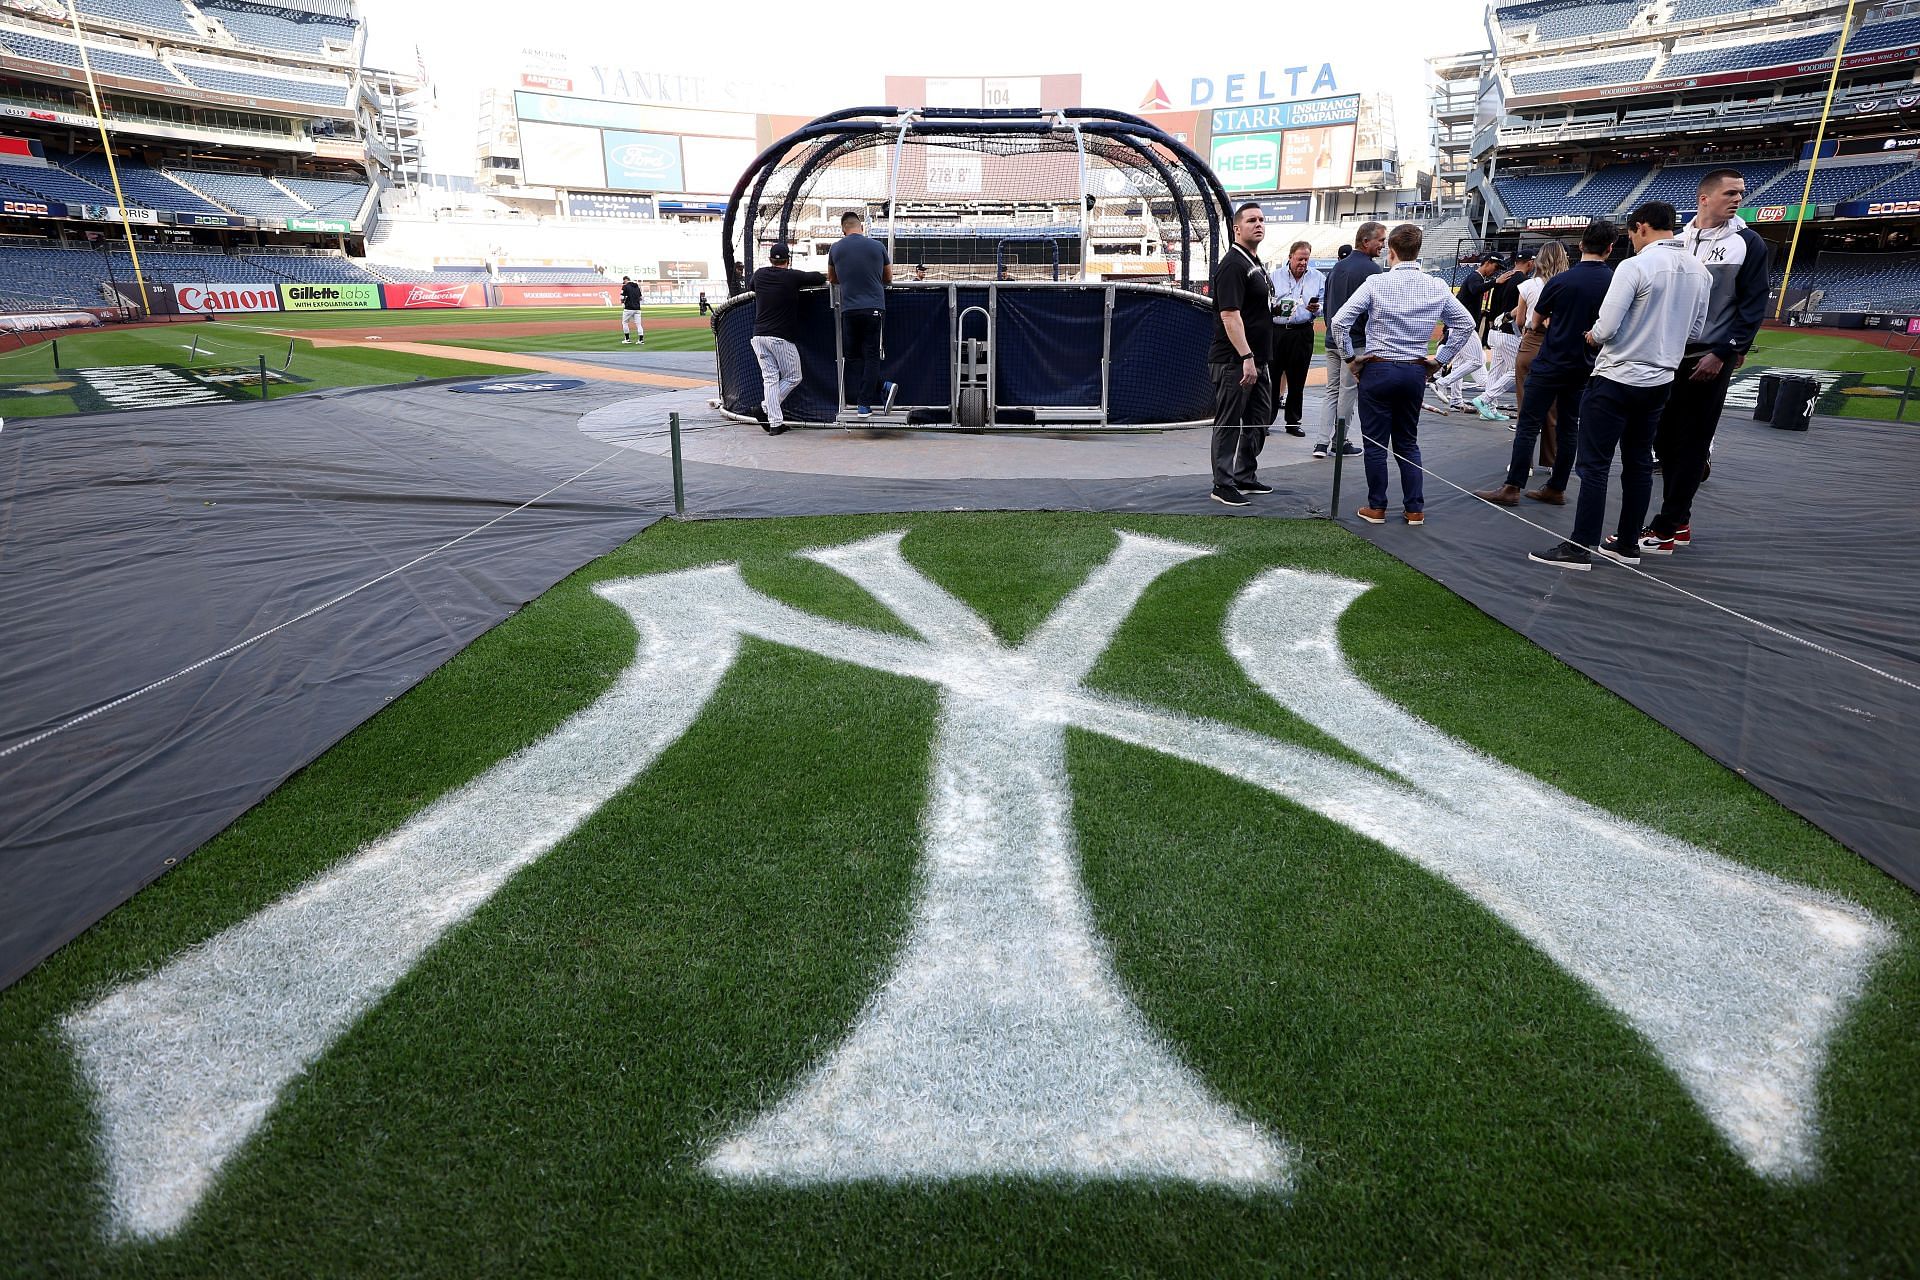 How much are the Yankees worth?